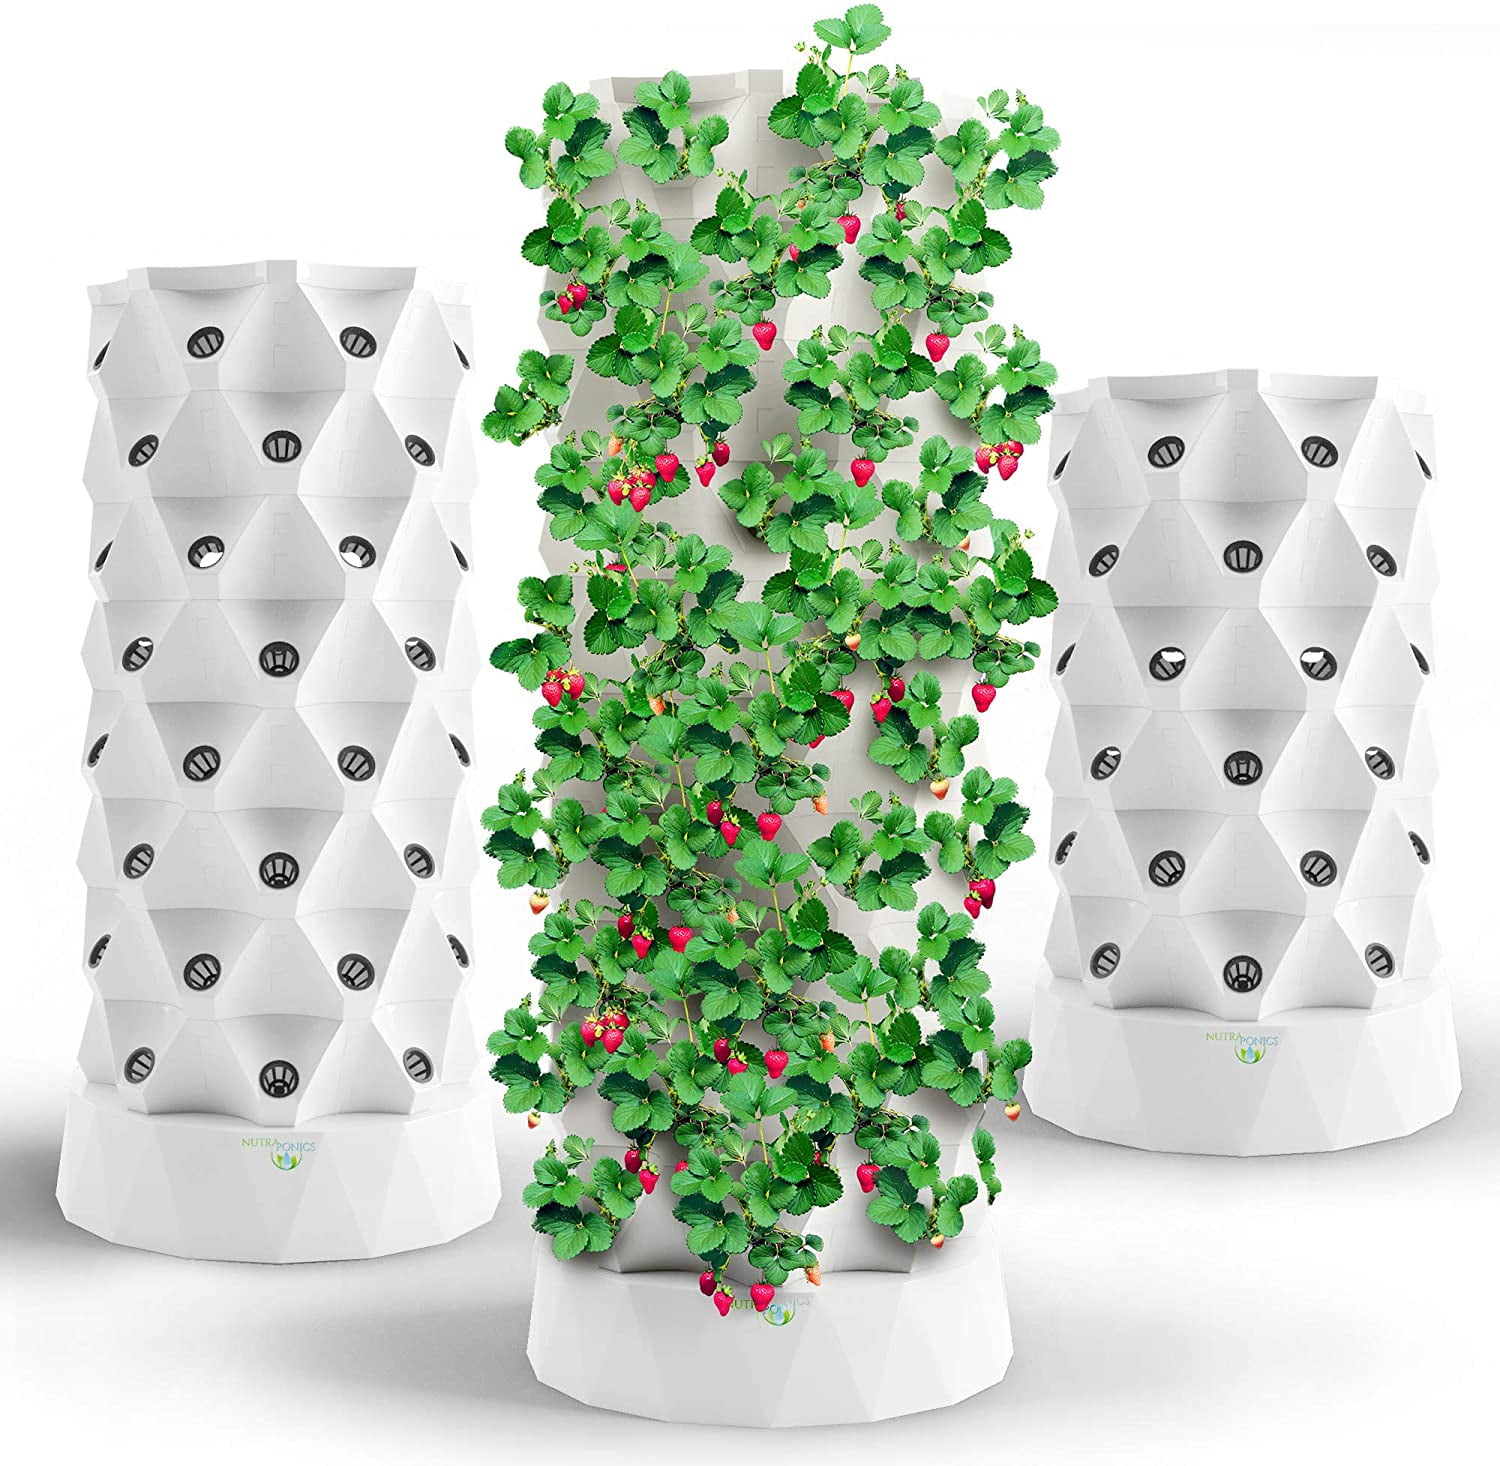 organic Growing Tower Unit for 48 Plants growing of Salads & Herbs Leafy Plants 